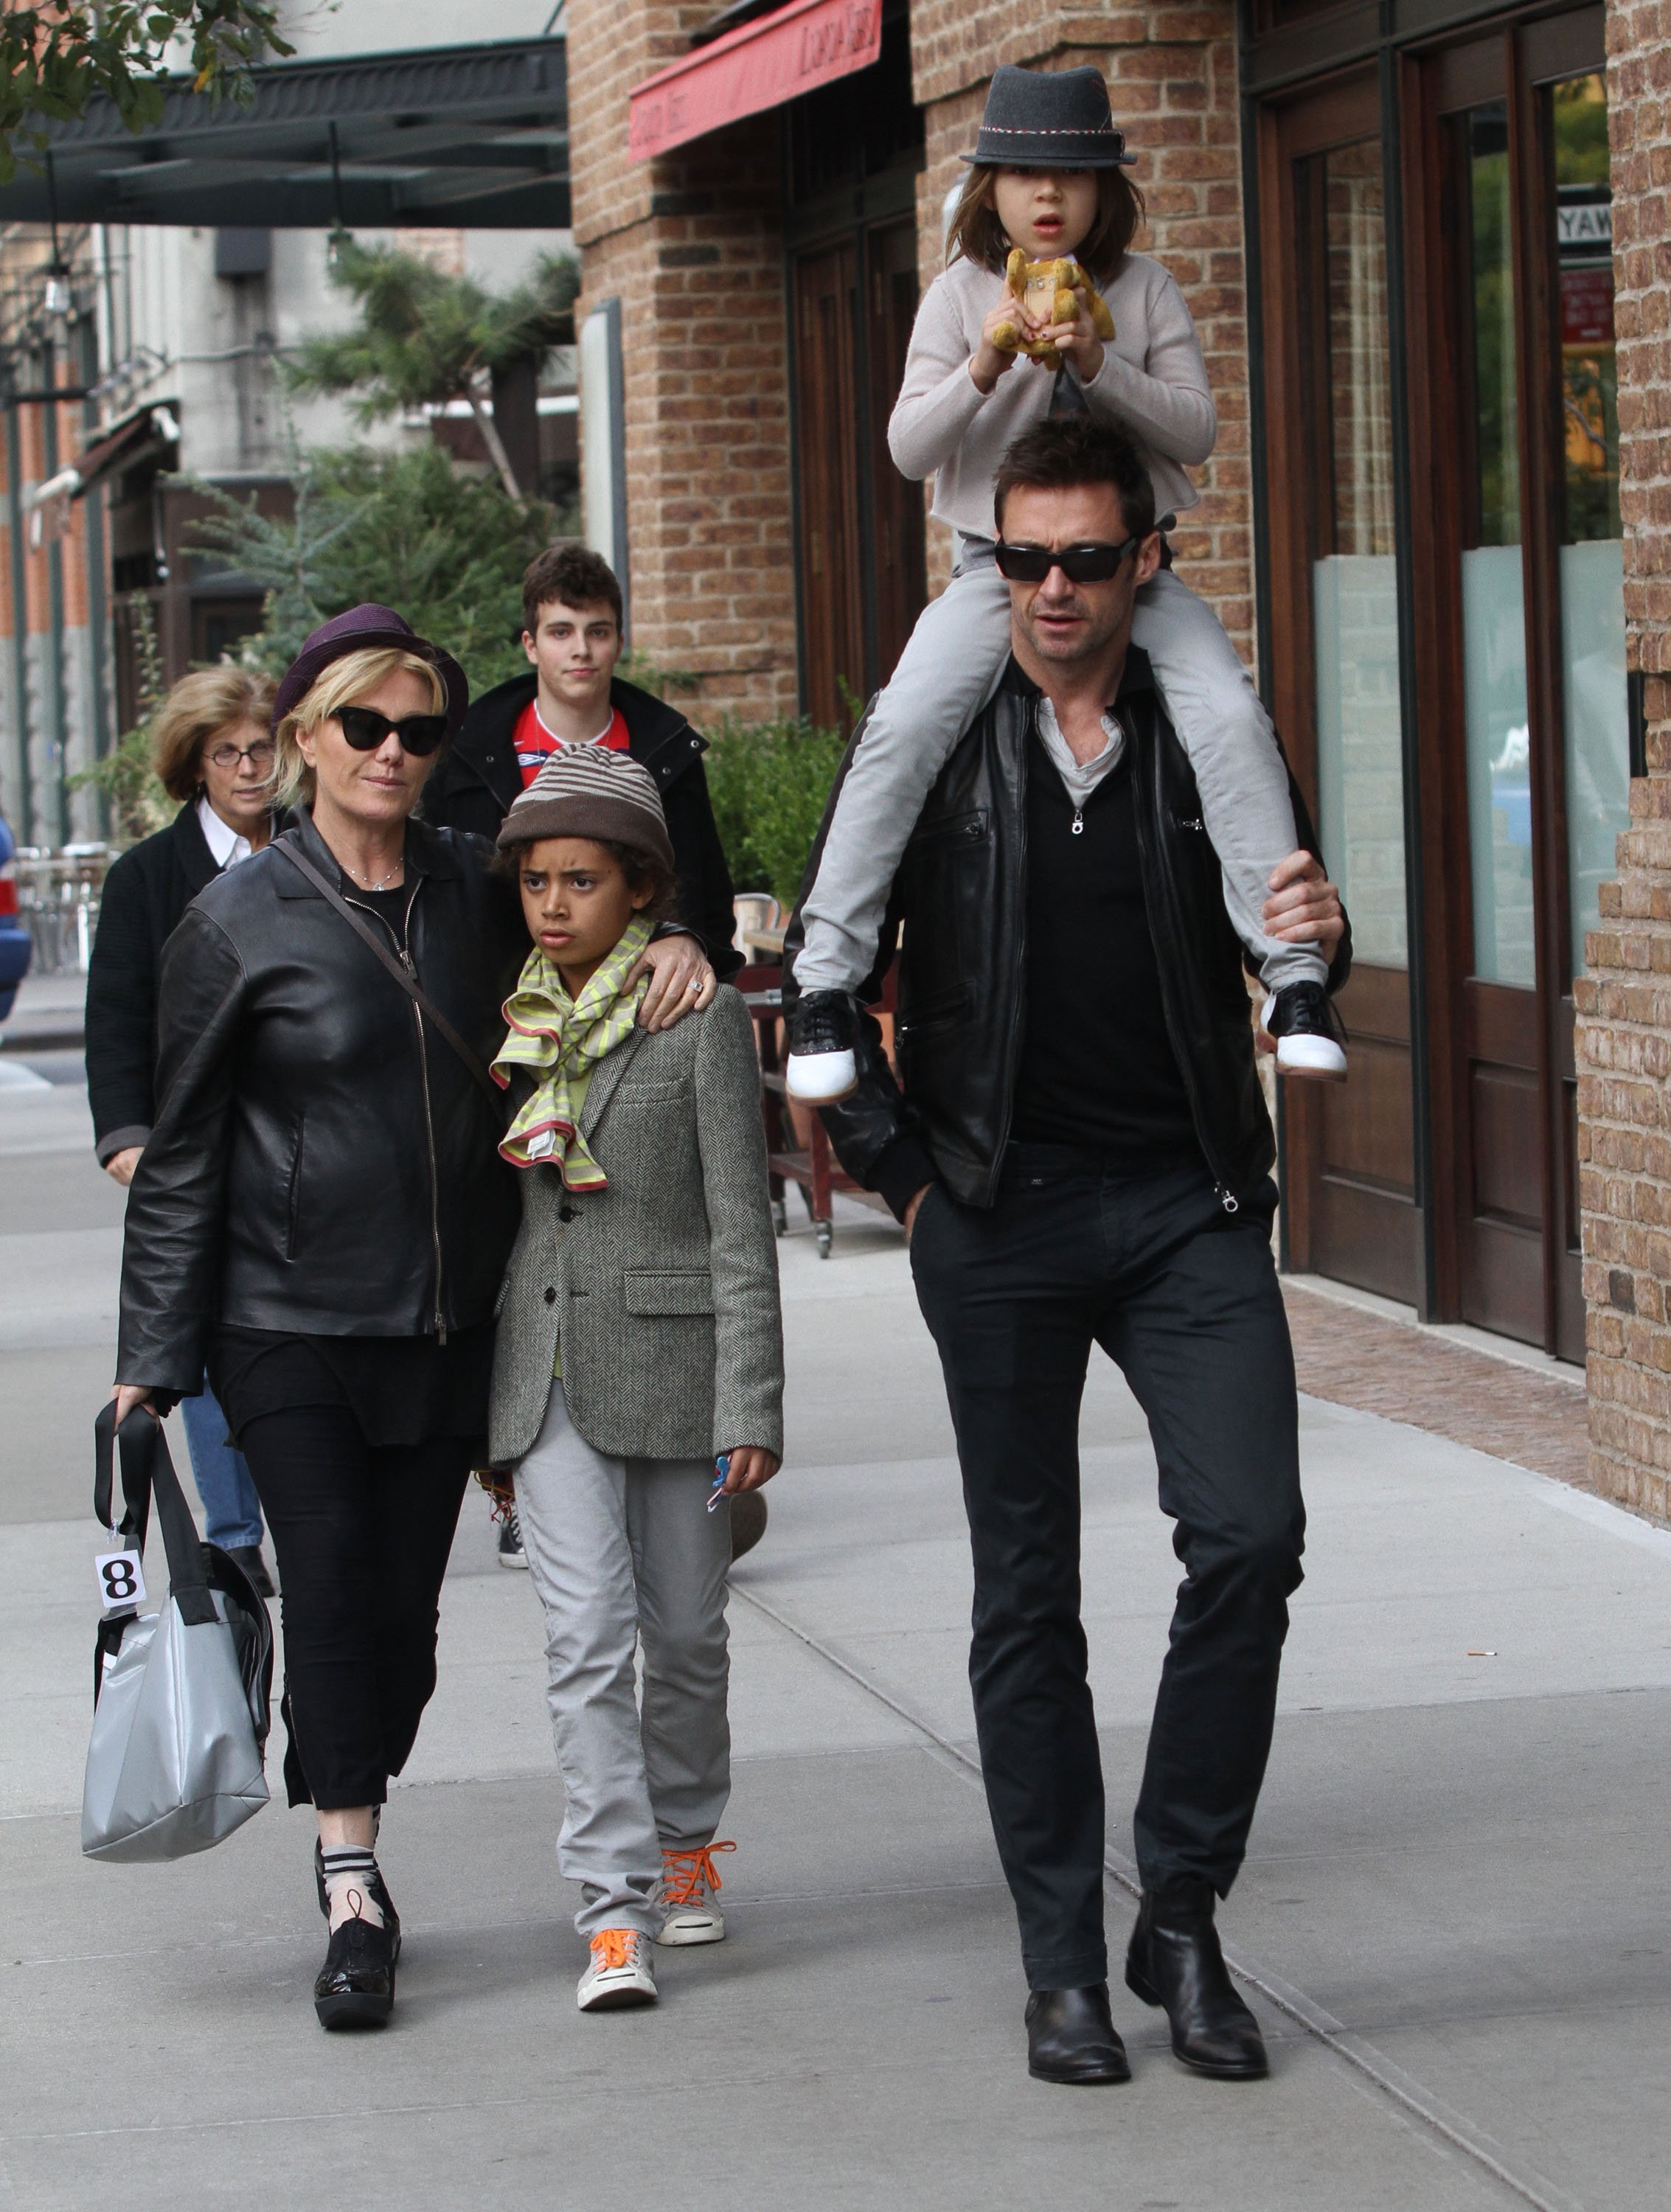 Deborra-Lee Furness, son Maximillian Jackman, daughter Ava Eliot Jackman and Hugh Jackman are seen arriving at Laughing Man Marketplace in Manhattan on October 23, 2011 in New York City. | Source: Getty Images